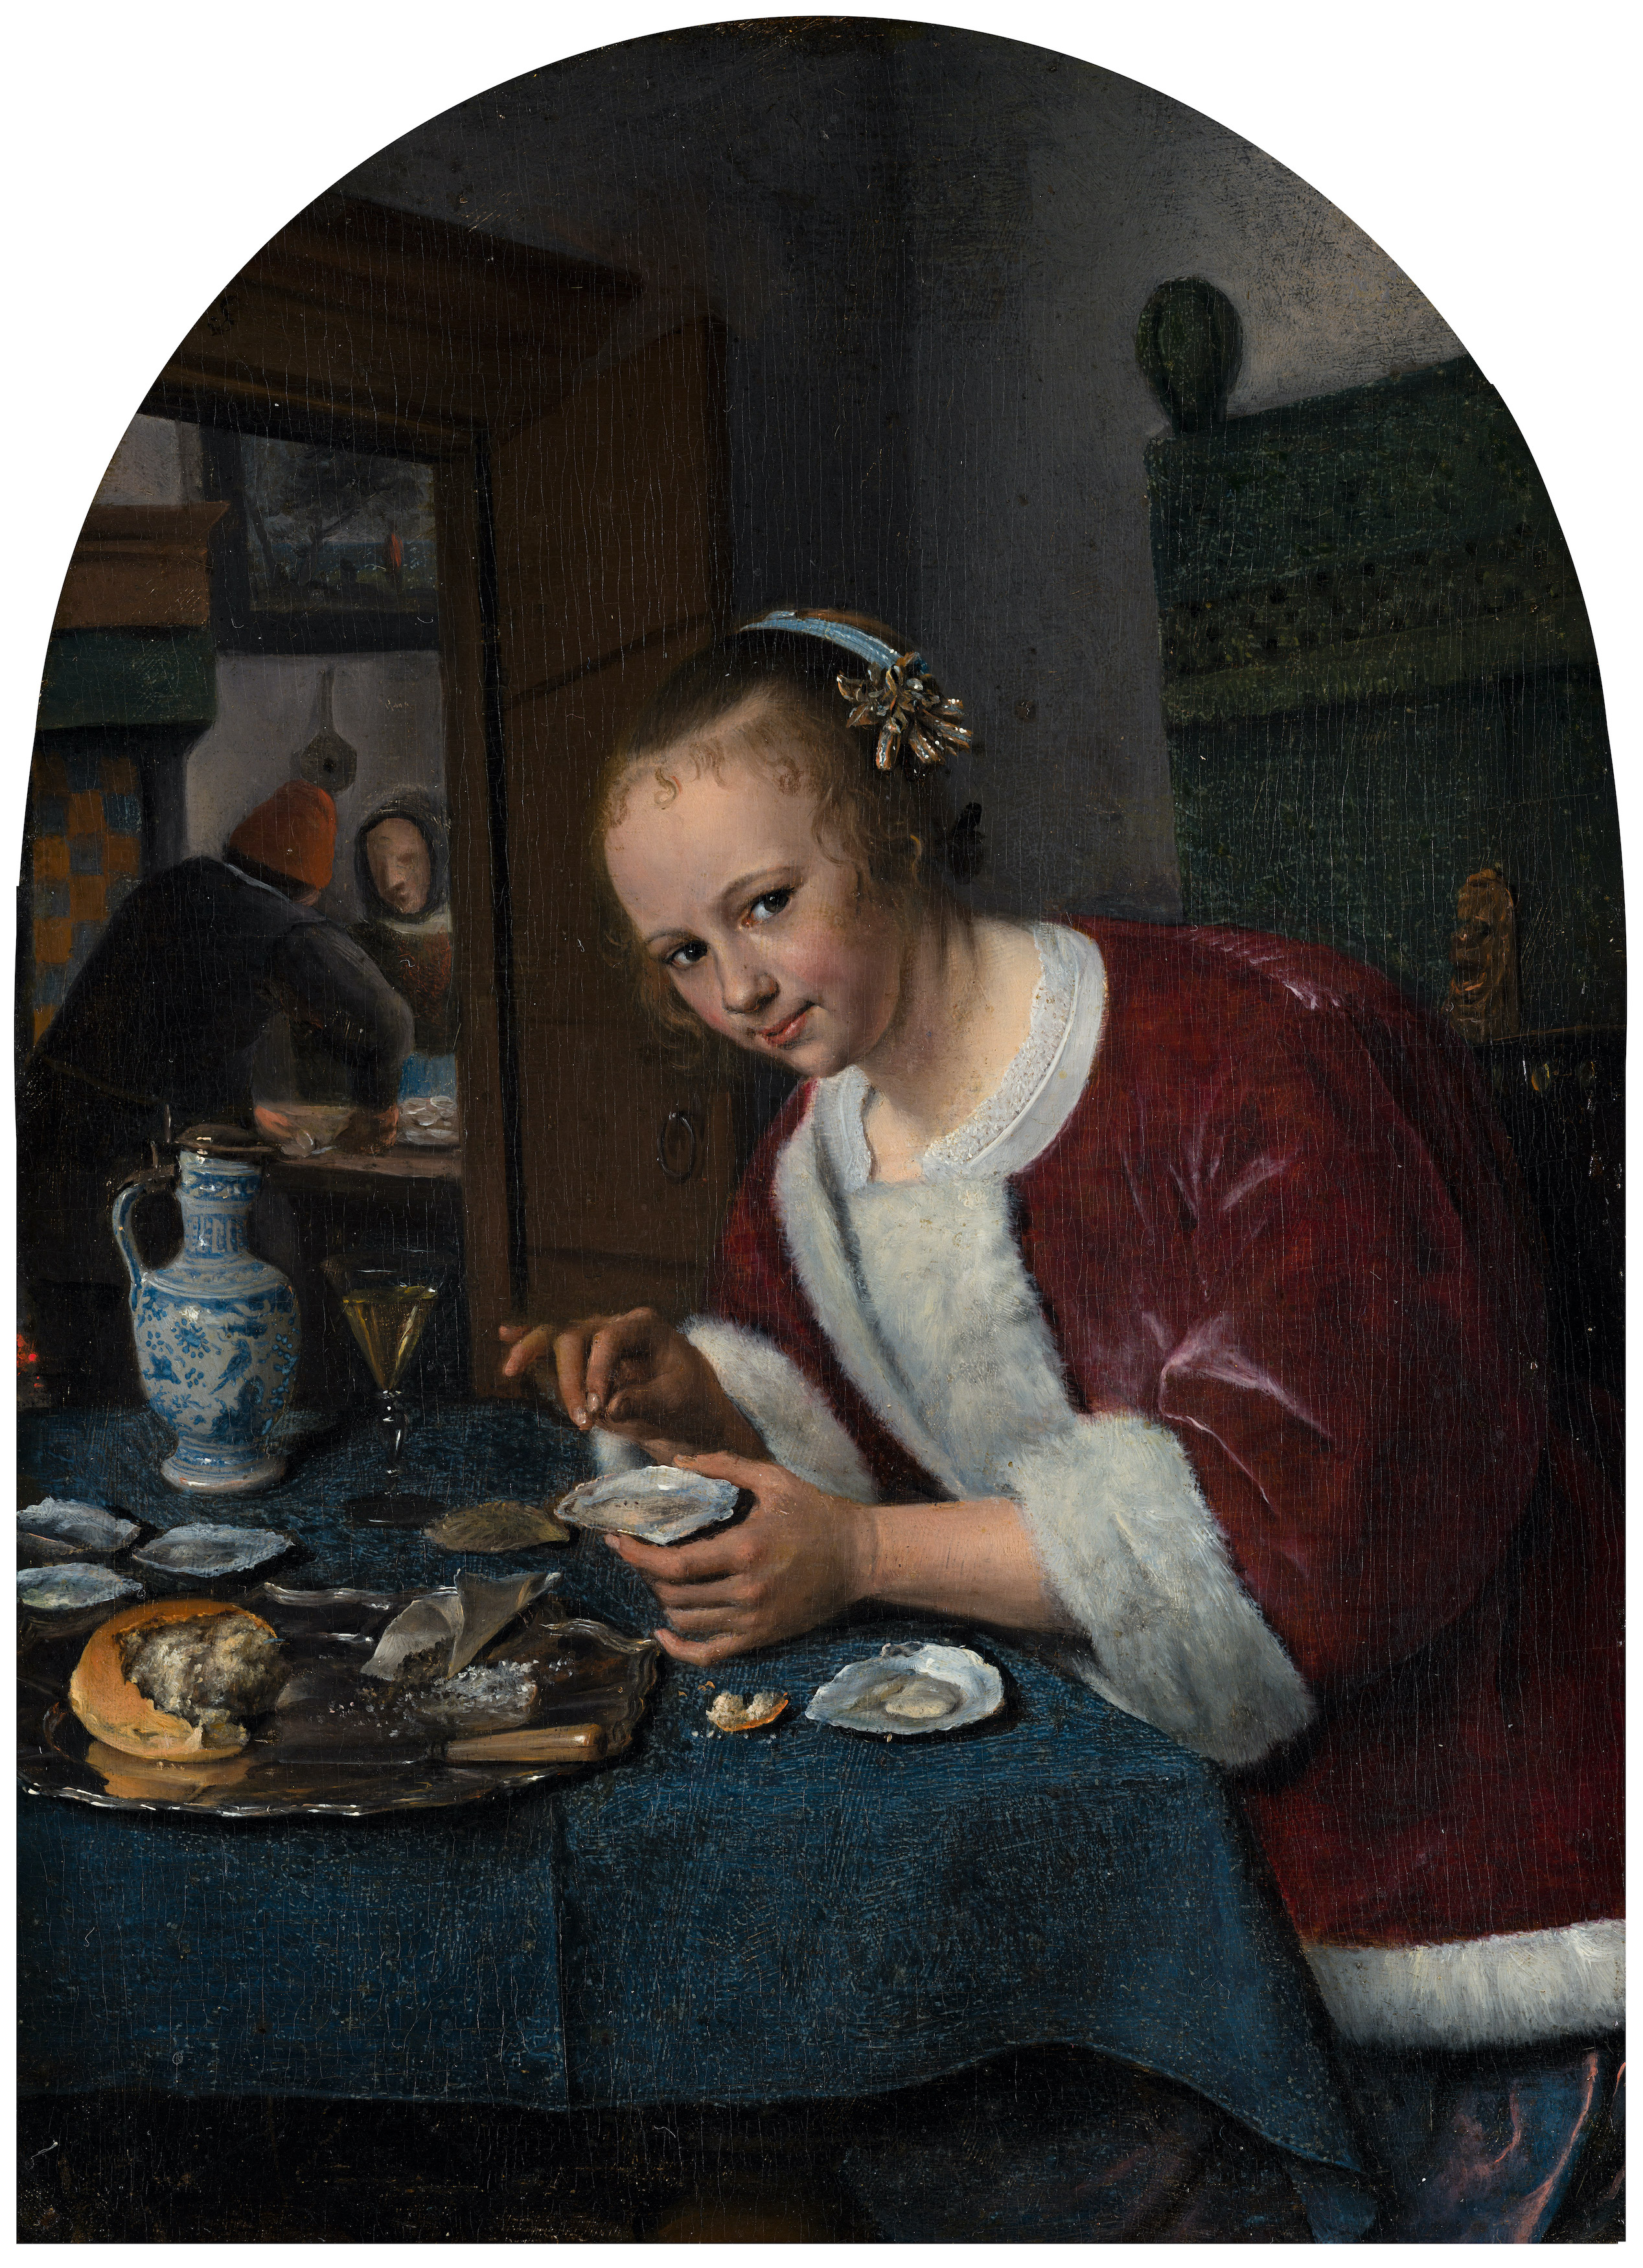 Girl Eating Oysters by Jan Steen - c. 1658 - 1660 - 20,4 x 15,1 cm Mauritshuis, The Hague